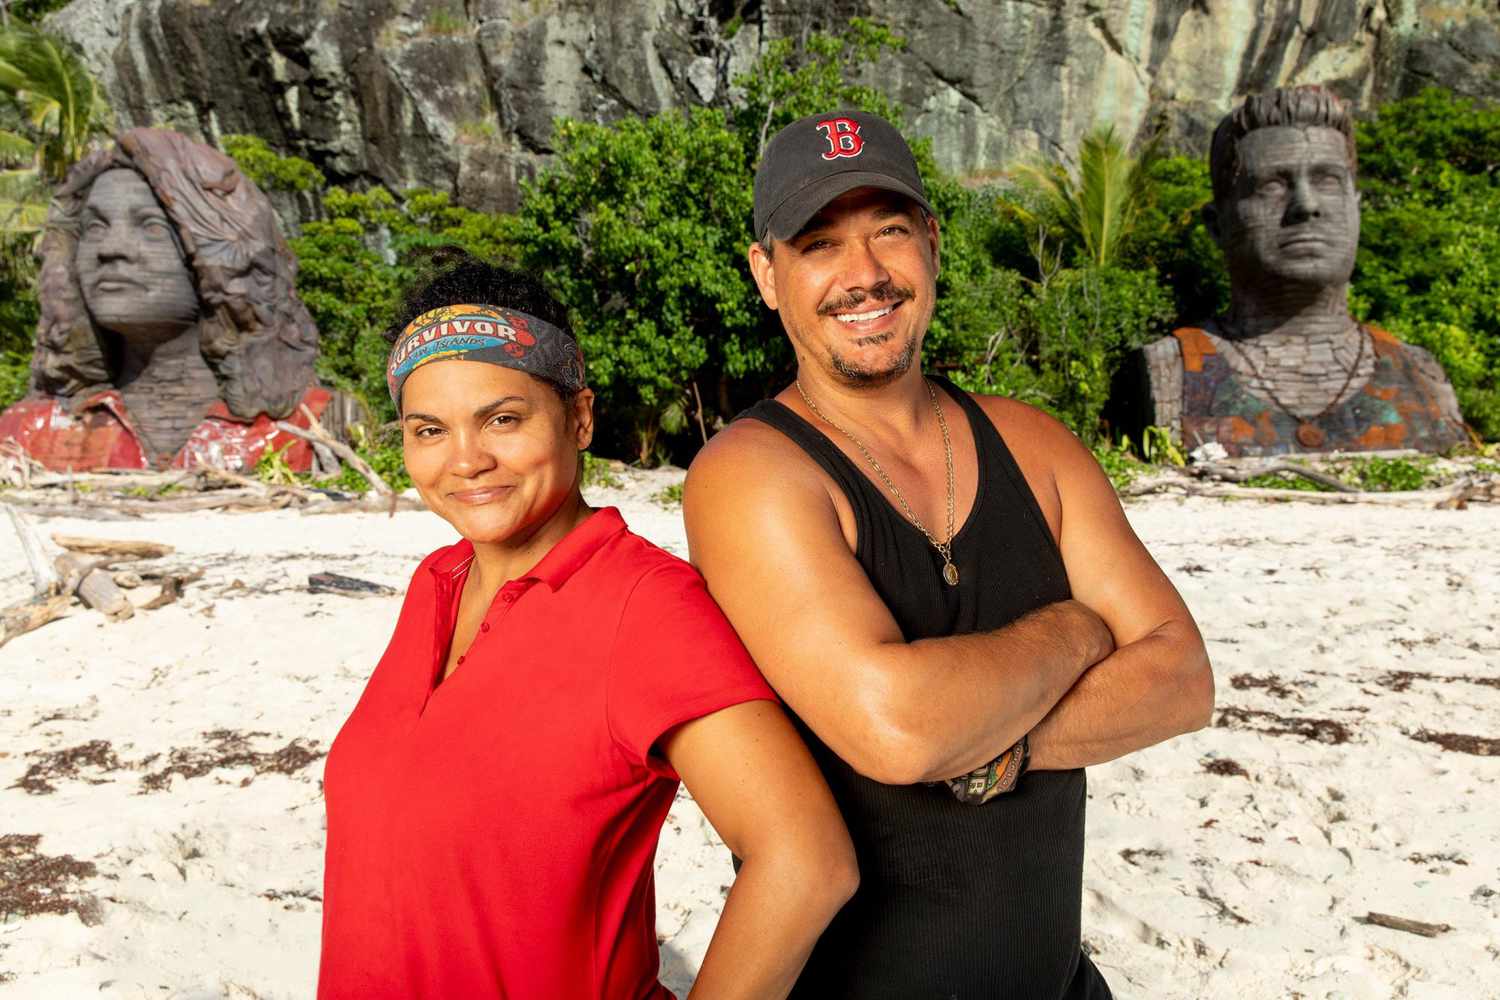 NO REUSE EXCEPT WHAT TO WATCH 09/25/19 This edition features two legendary winners, Boston Rob Mariano and Sandra Diaz-Twine, who return to the game to serve as mentors to a group of 20 new castaways on SURVIVOR: Island of the Idols, when the Emmy Award-winning series returns for its 39th season, Wednesday, Sept. 25 (8:00-9:30PM, ET/PT) on the CBS Television Network. Photo: Robert Voets/CBS Entertainment ©2019 CBS Broadcasting, Inc. All Rights Reserved.